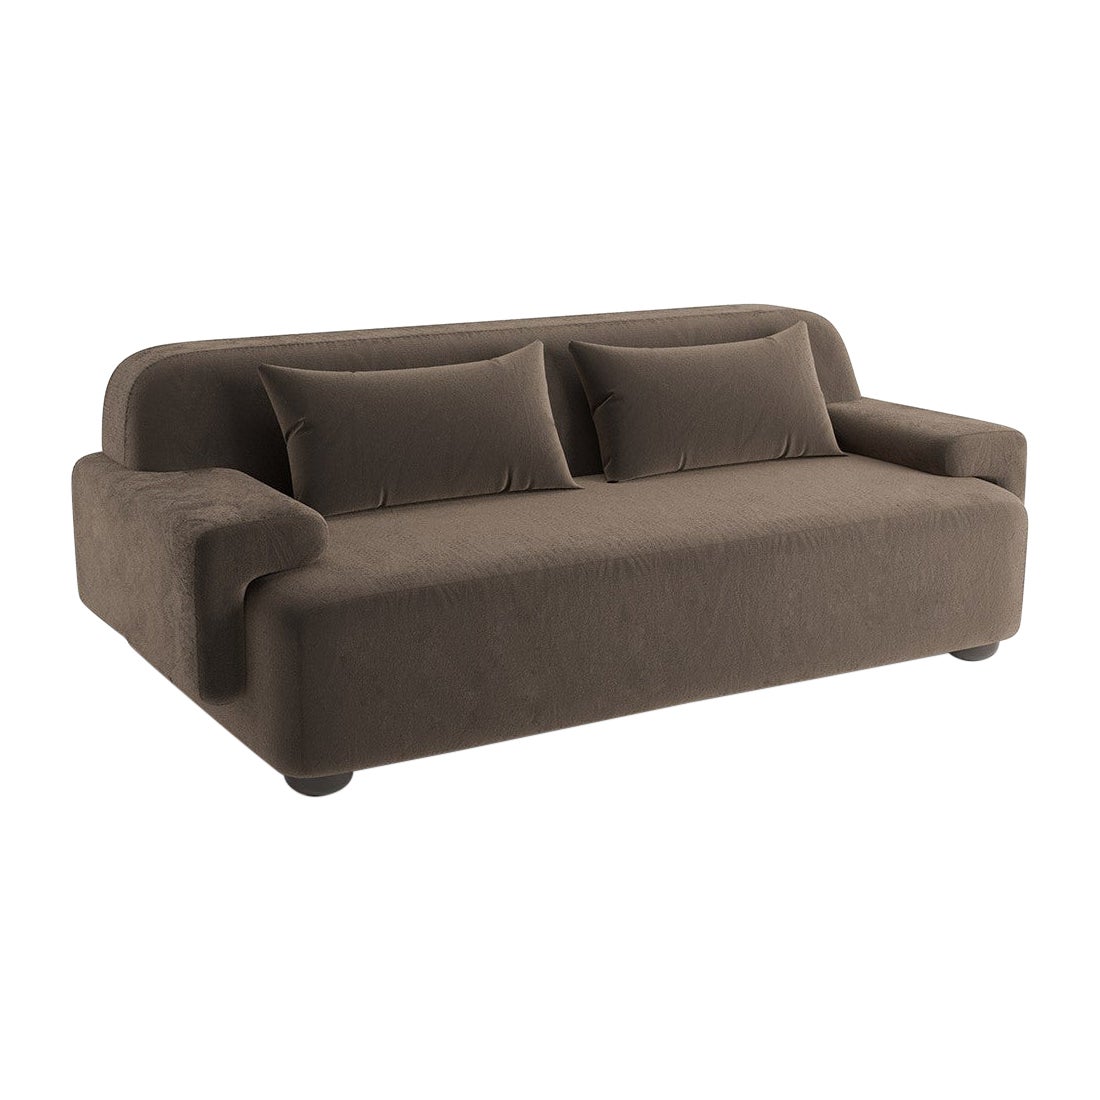 Popus Editions Lena 3 Seater Sofa in Brown Verone Velvet Upholstery For Sale